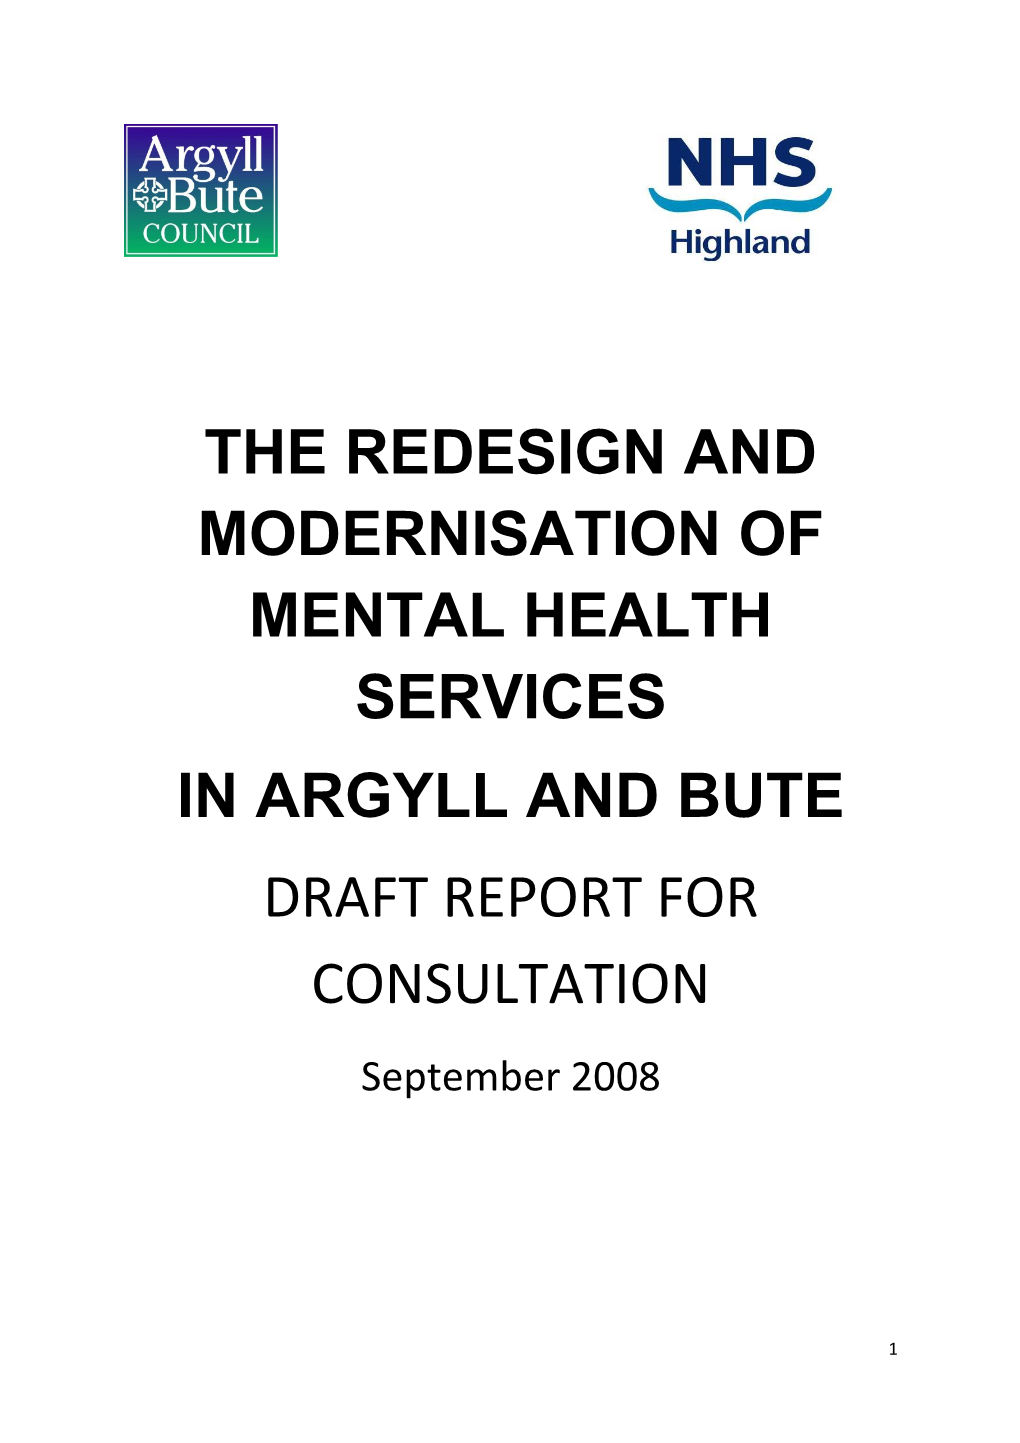 The Redesign and Modernisation of Mental Health Services